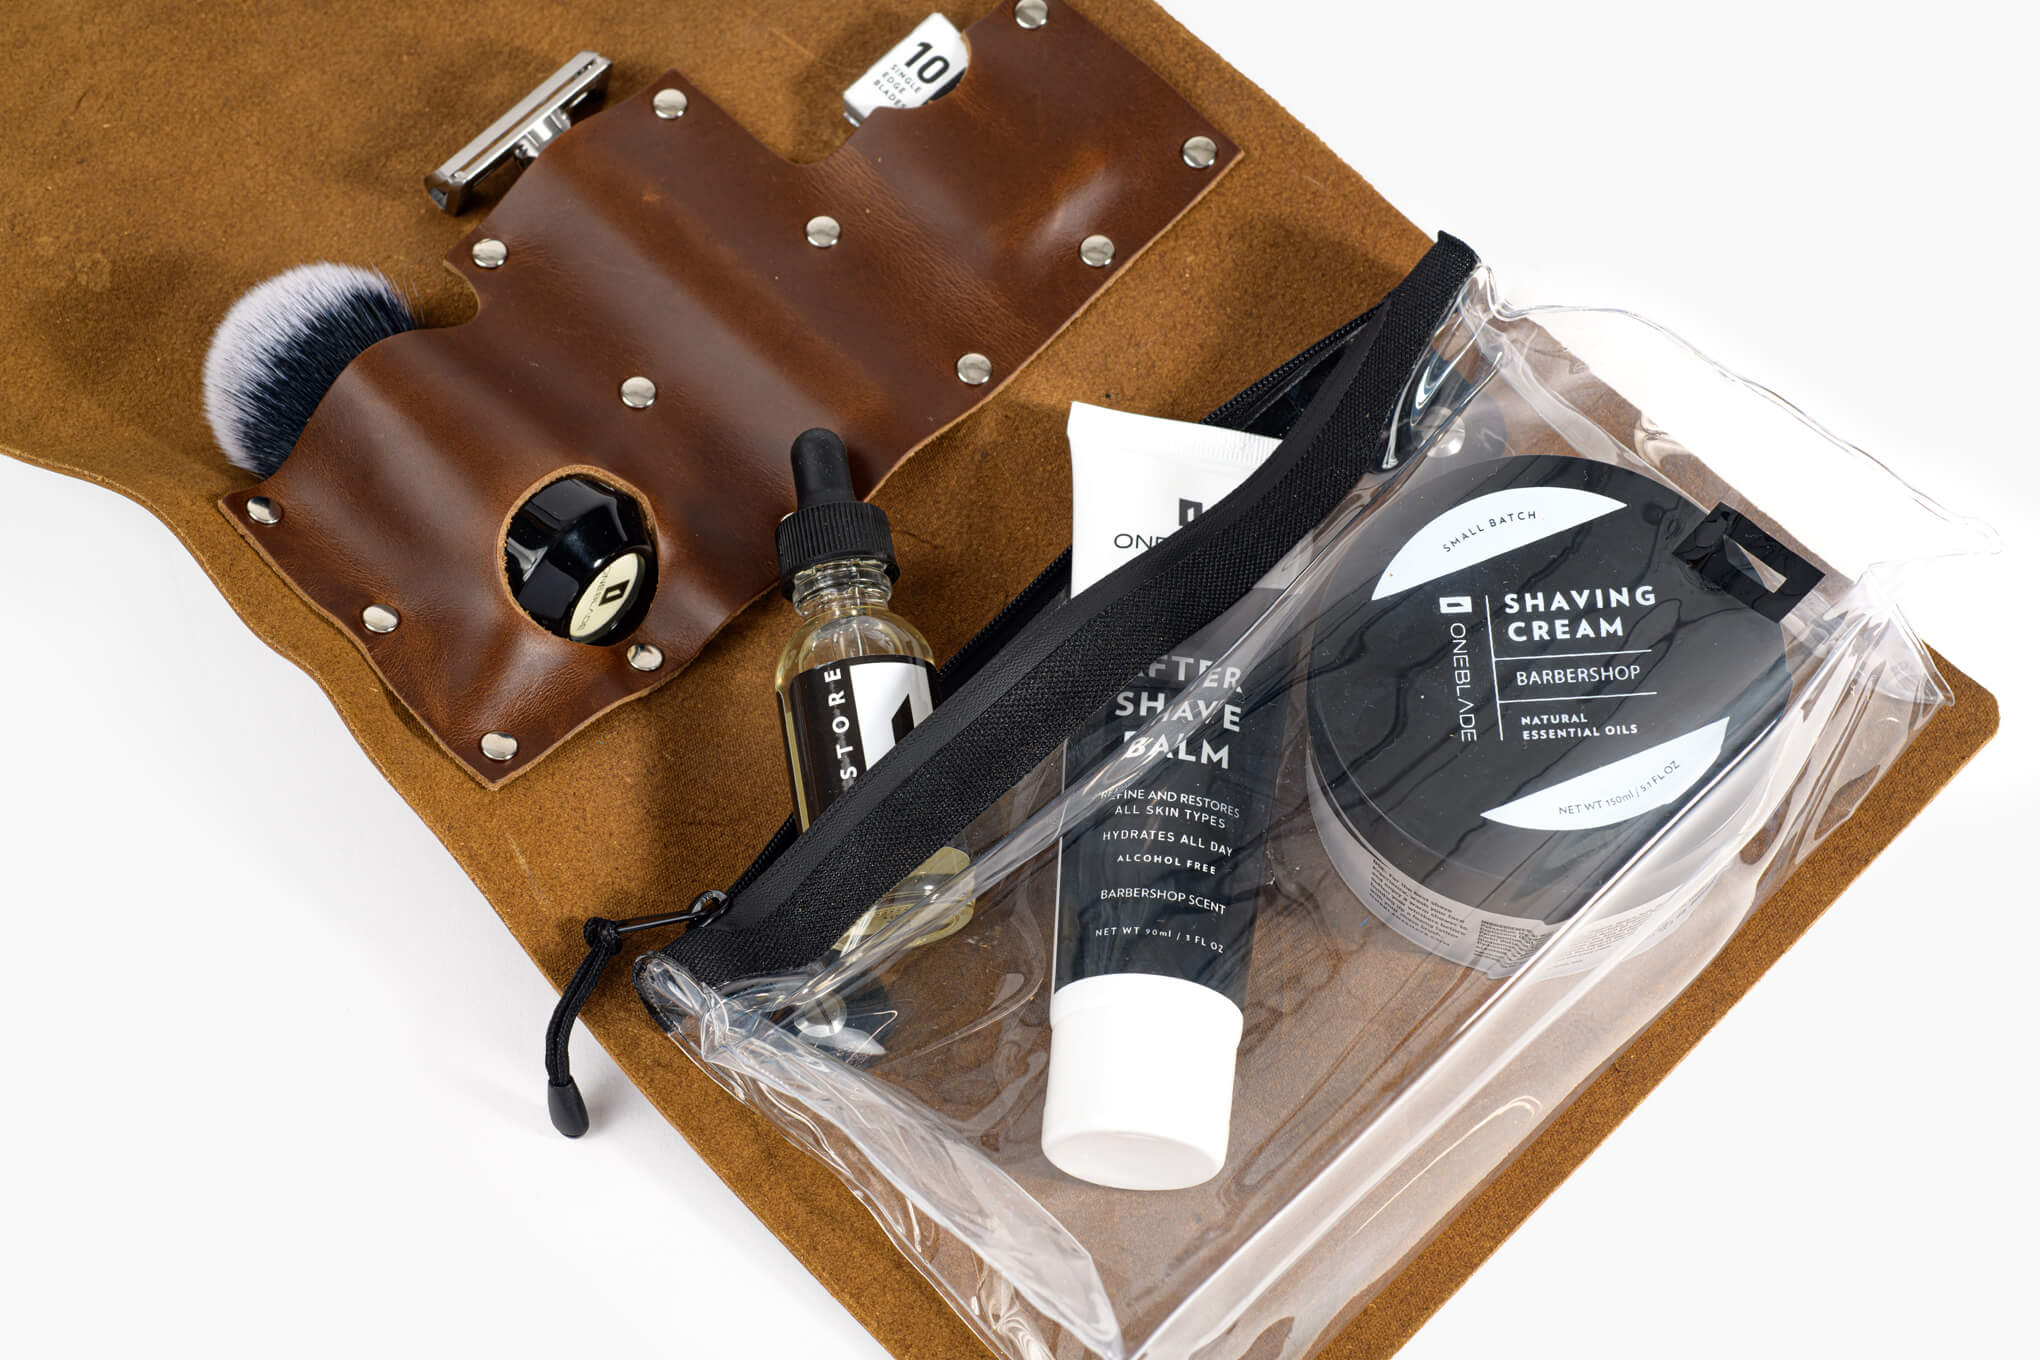 The Ultimate All-in-One Travel Grooming Kit + Toiletry Bag